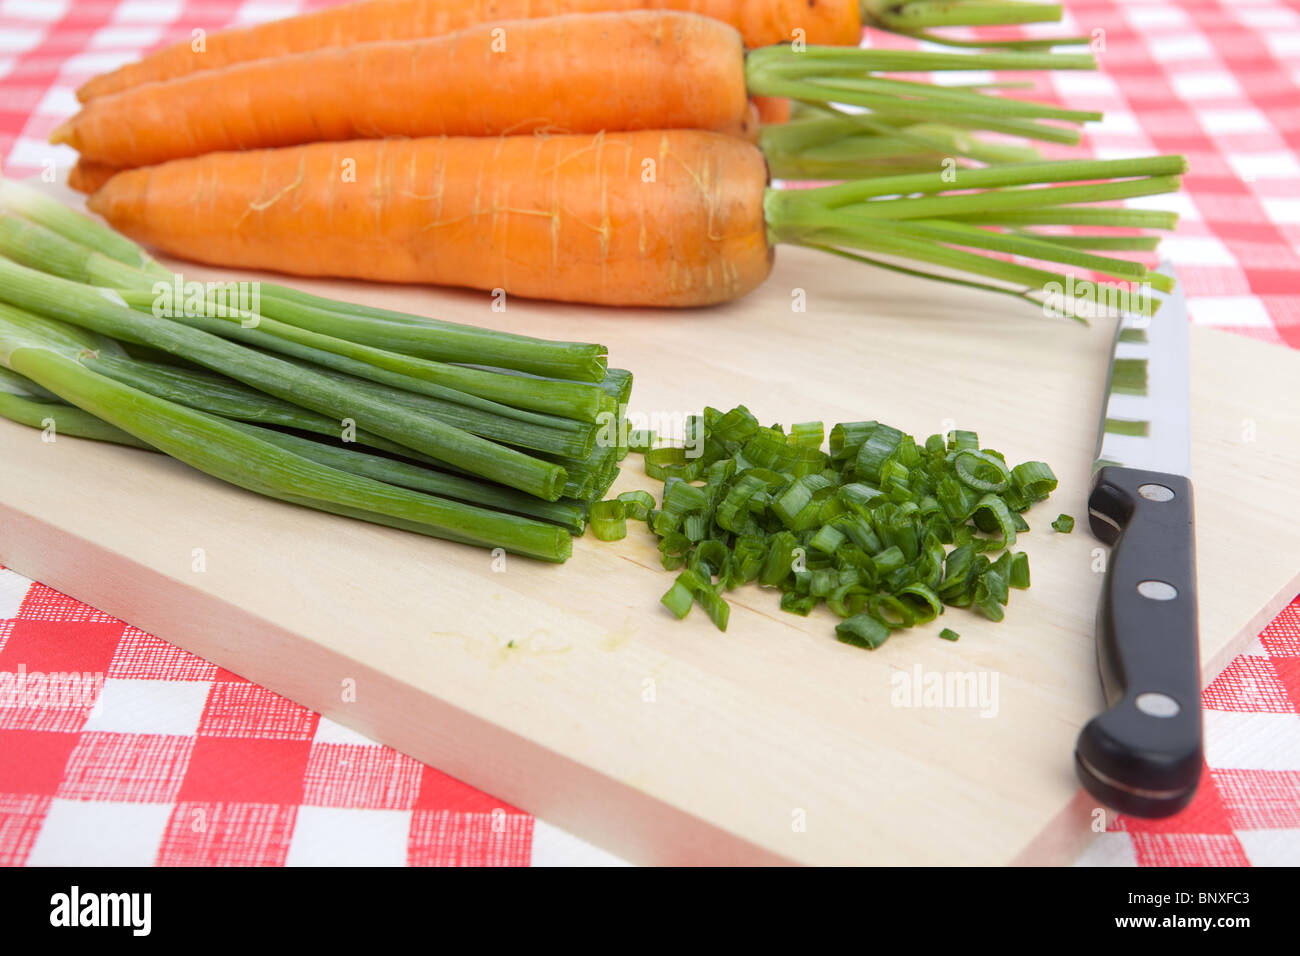 Chopped Spring Onion and Carrots on a Chopping Board Stock Photo